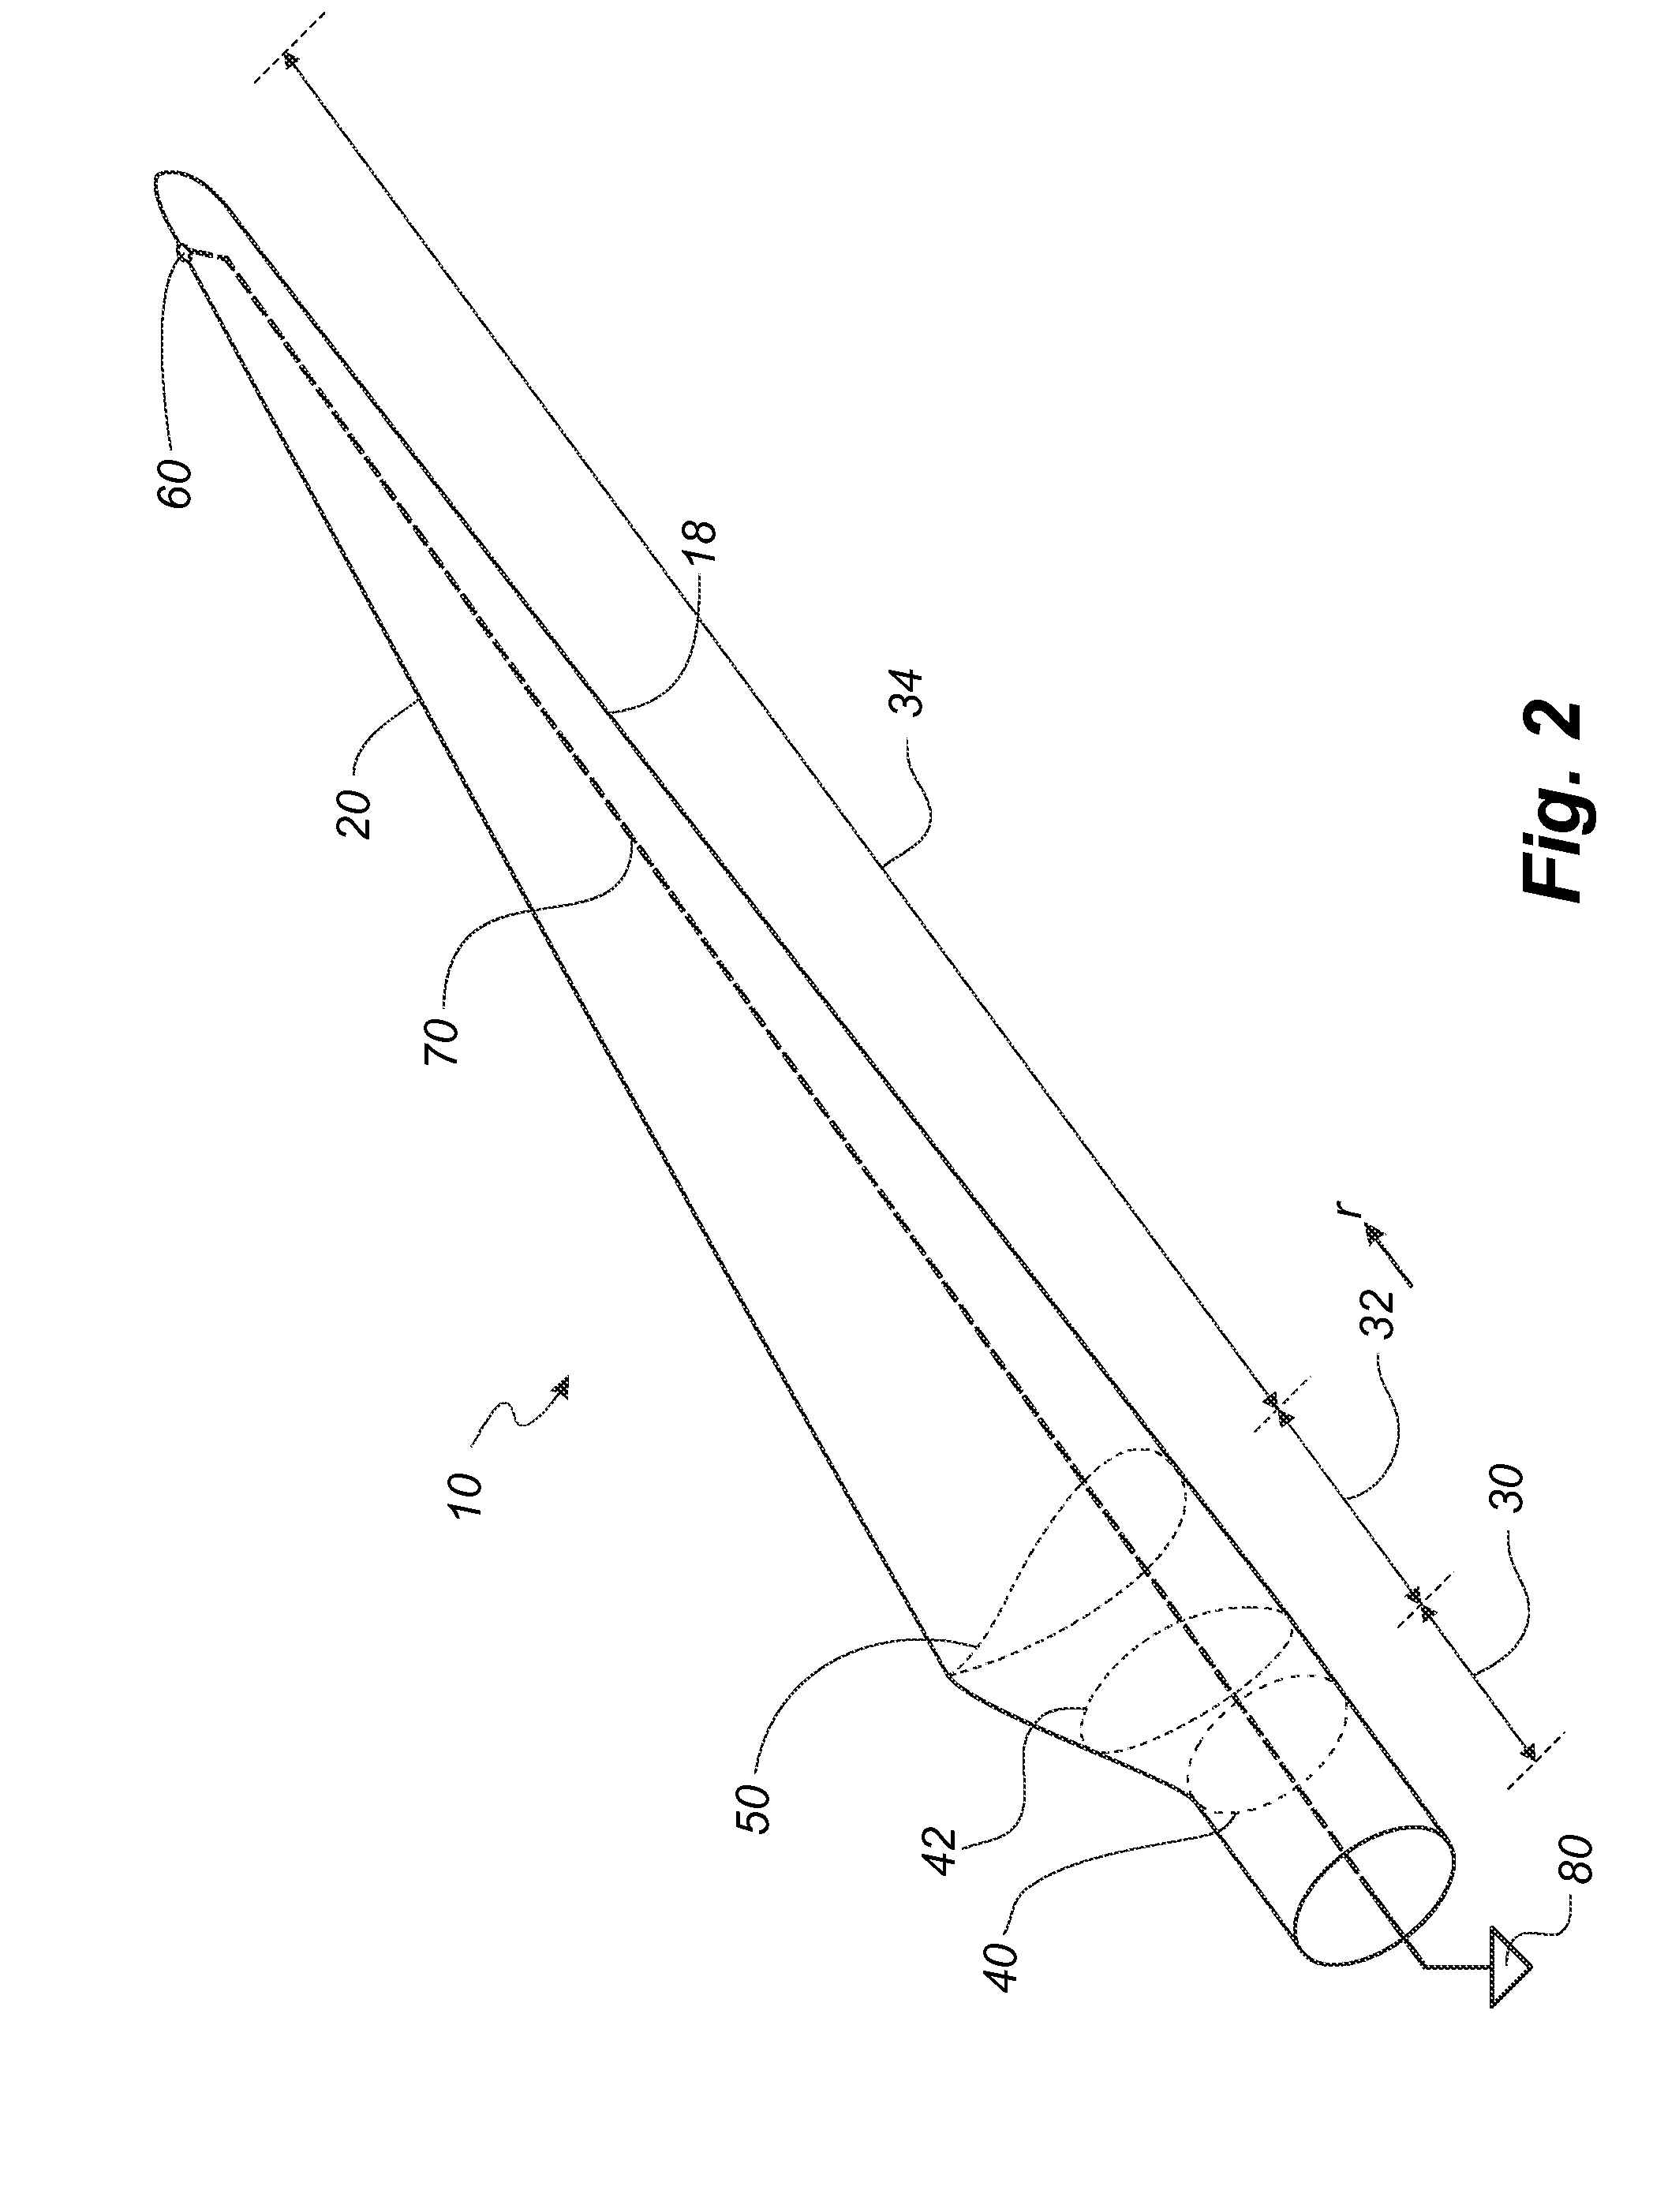 Wind turbine blade with lightning protection system